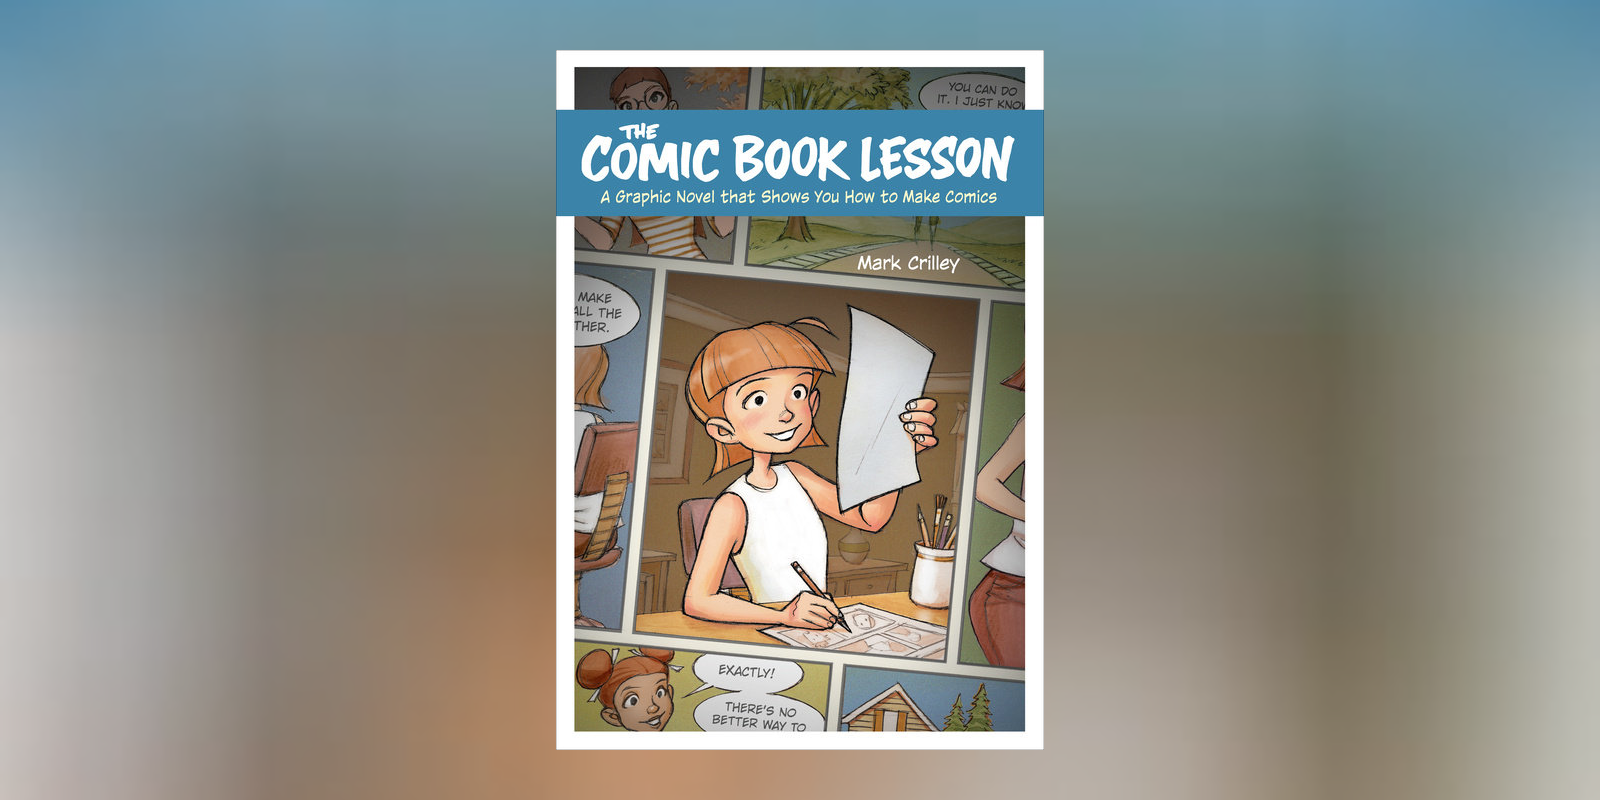 FROM THE PAGE: An Excerpt from Mark Crilley’s <i>The Comic Book Lesson</i>